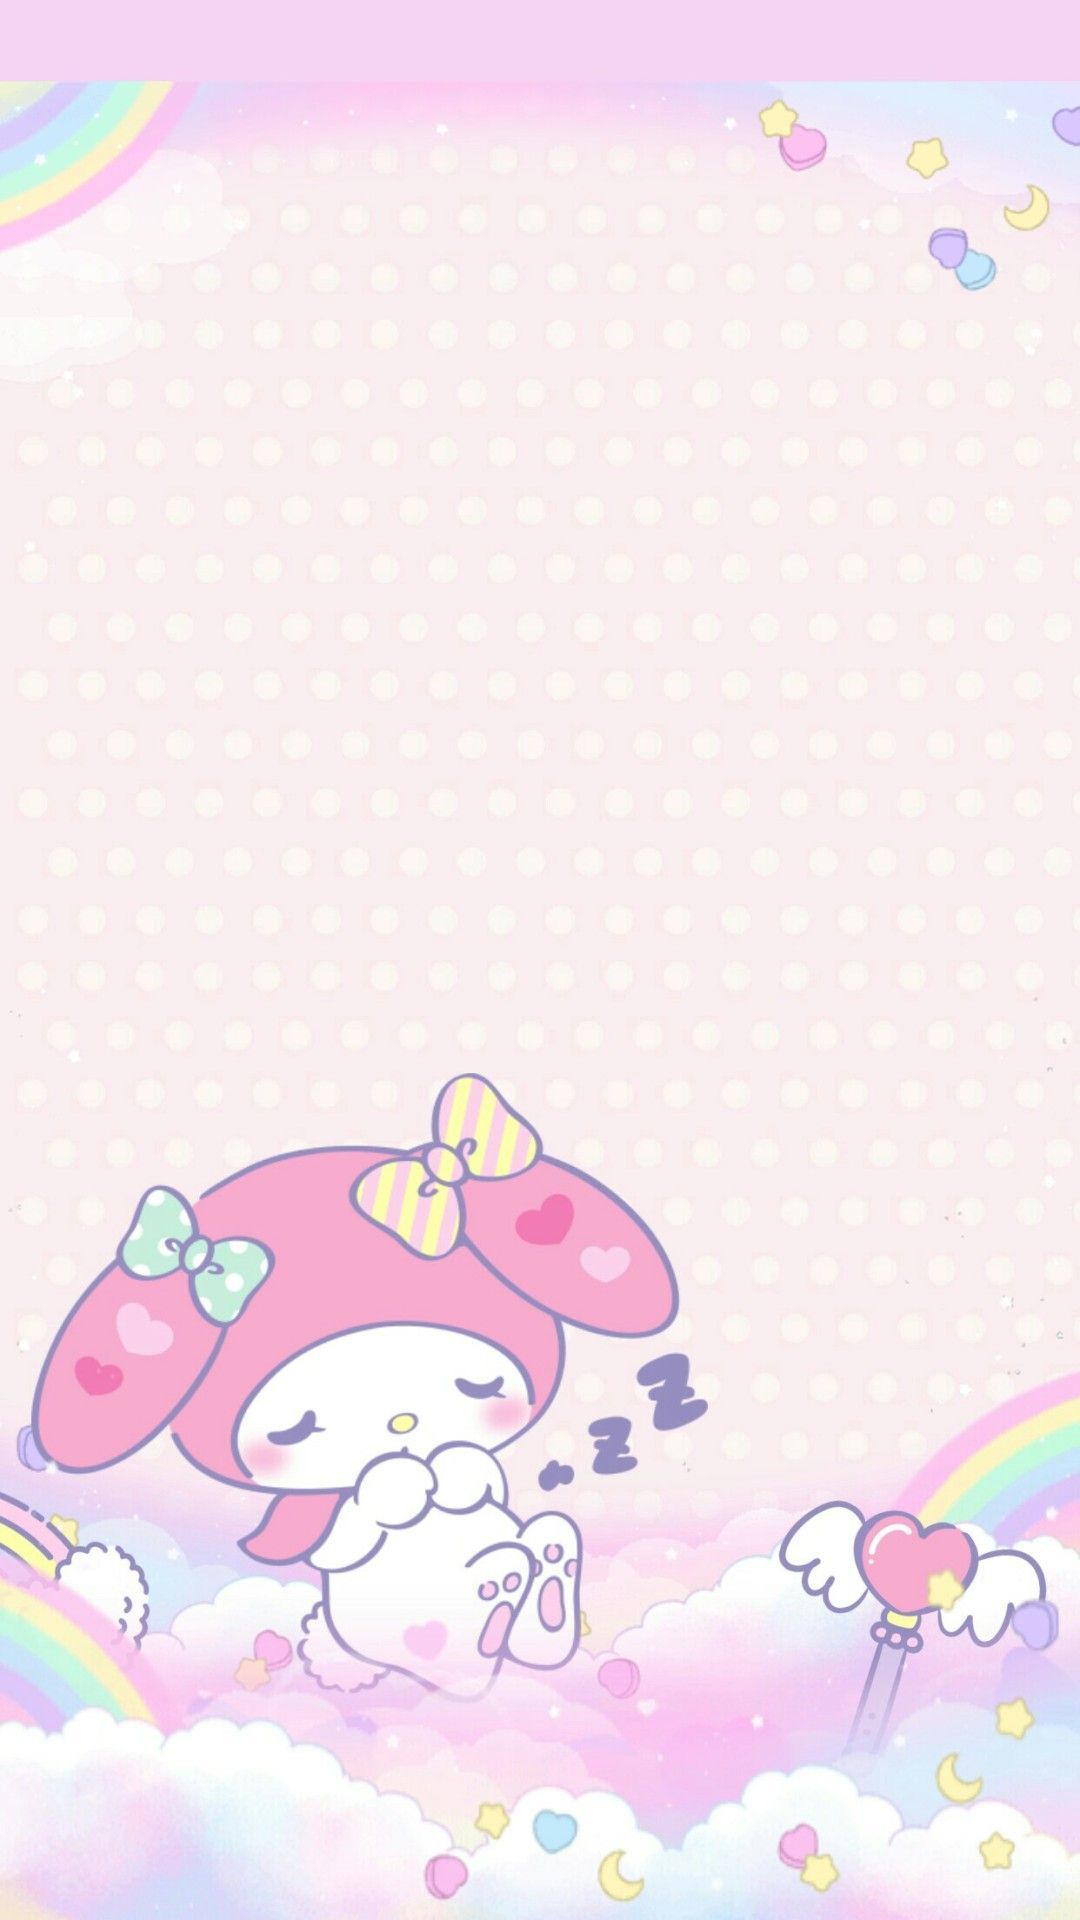 IPhone wallpaper Sanrio My Melody with high-resolution 1080x1920 pixel. You can use this wallpaper for your iPhone 5, 6, 7, 8, X, XS, XR backgrounds, Mobile Screensaver, or iPad Lock Screen - Sanrio